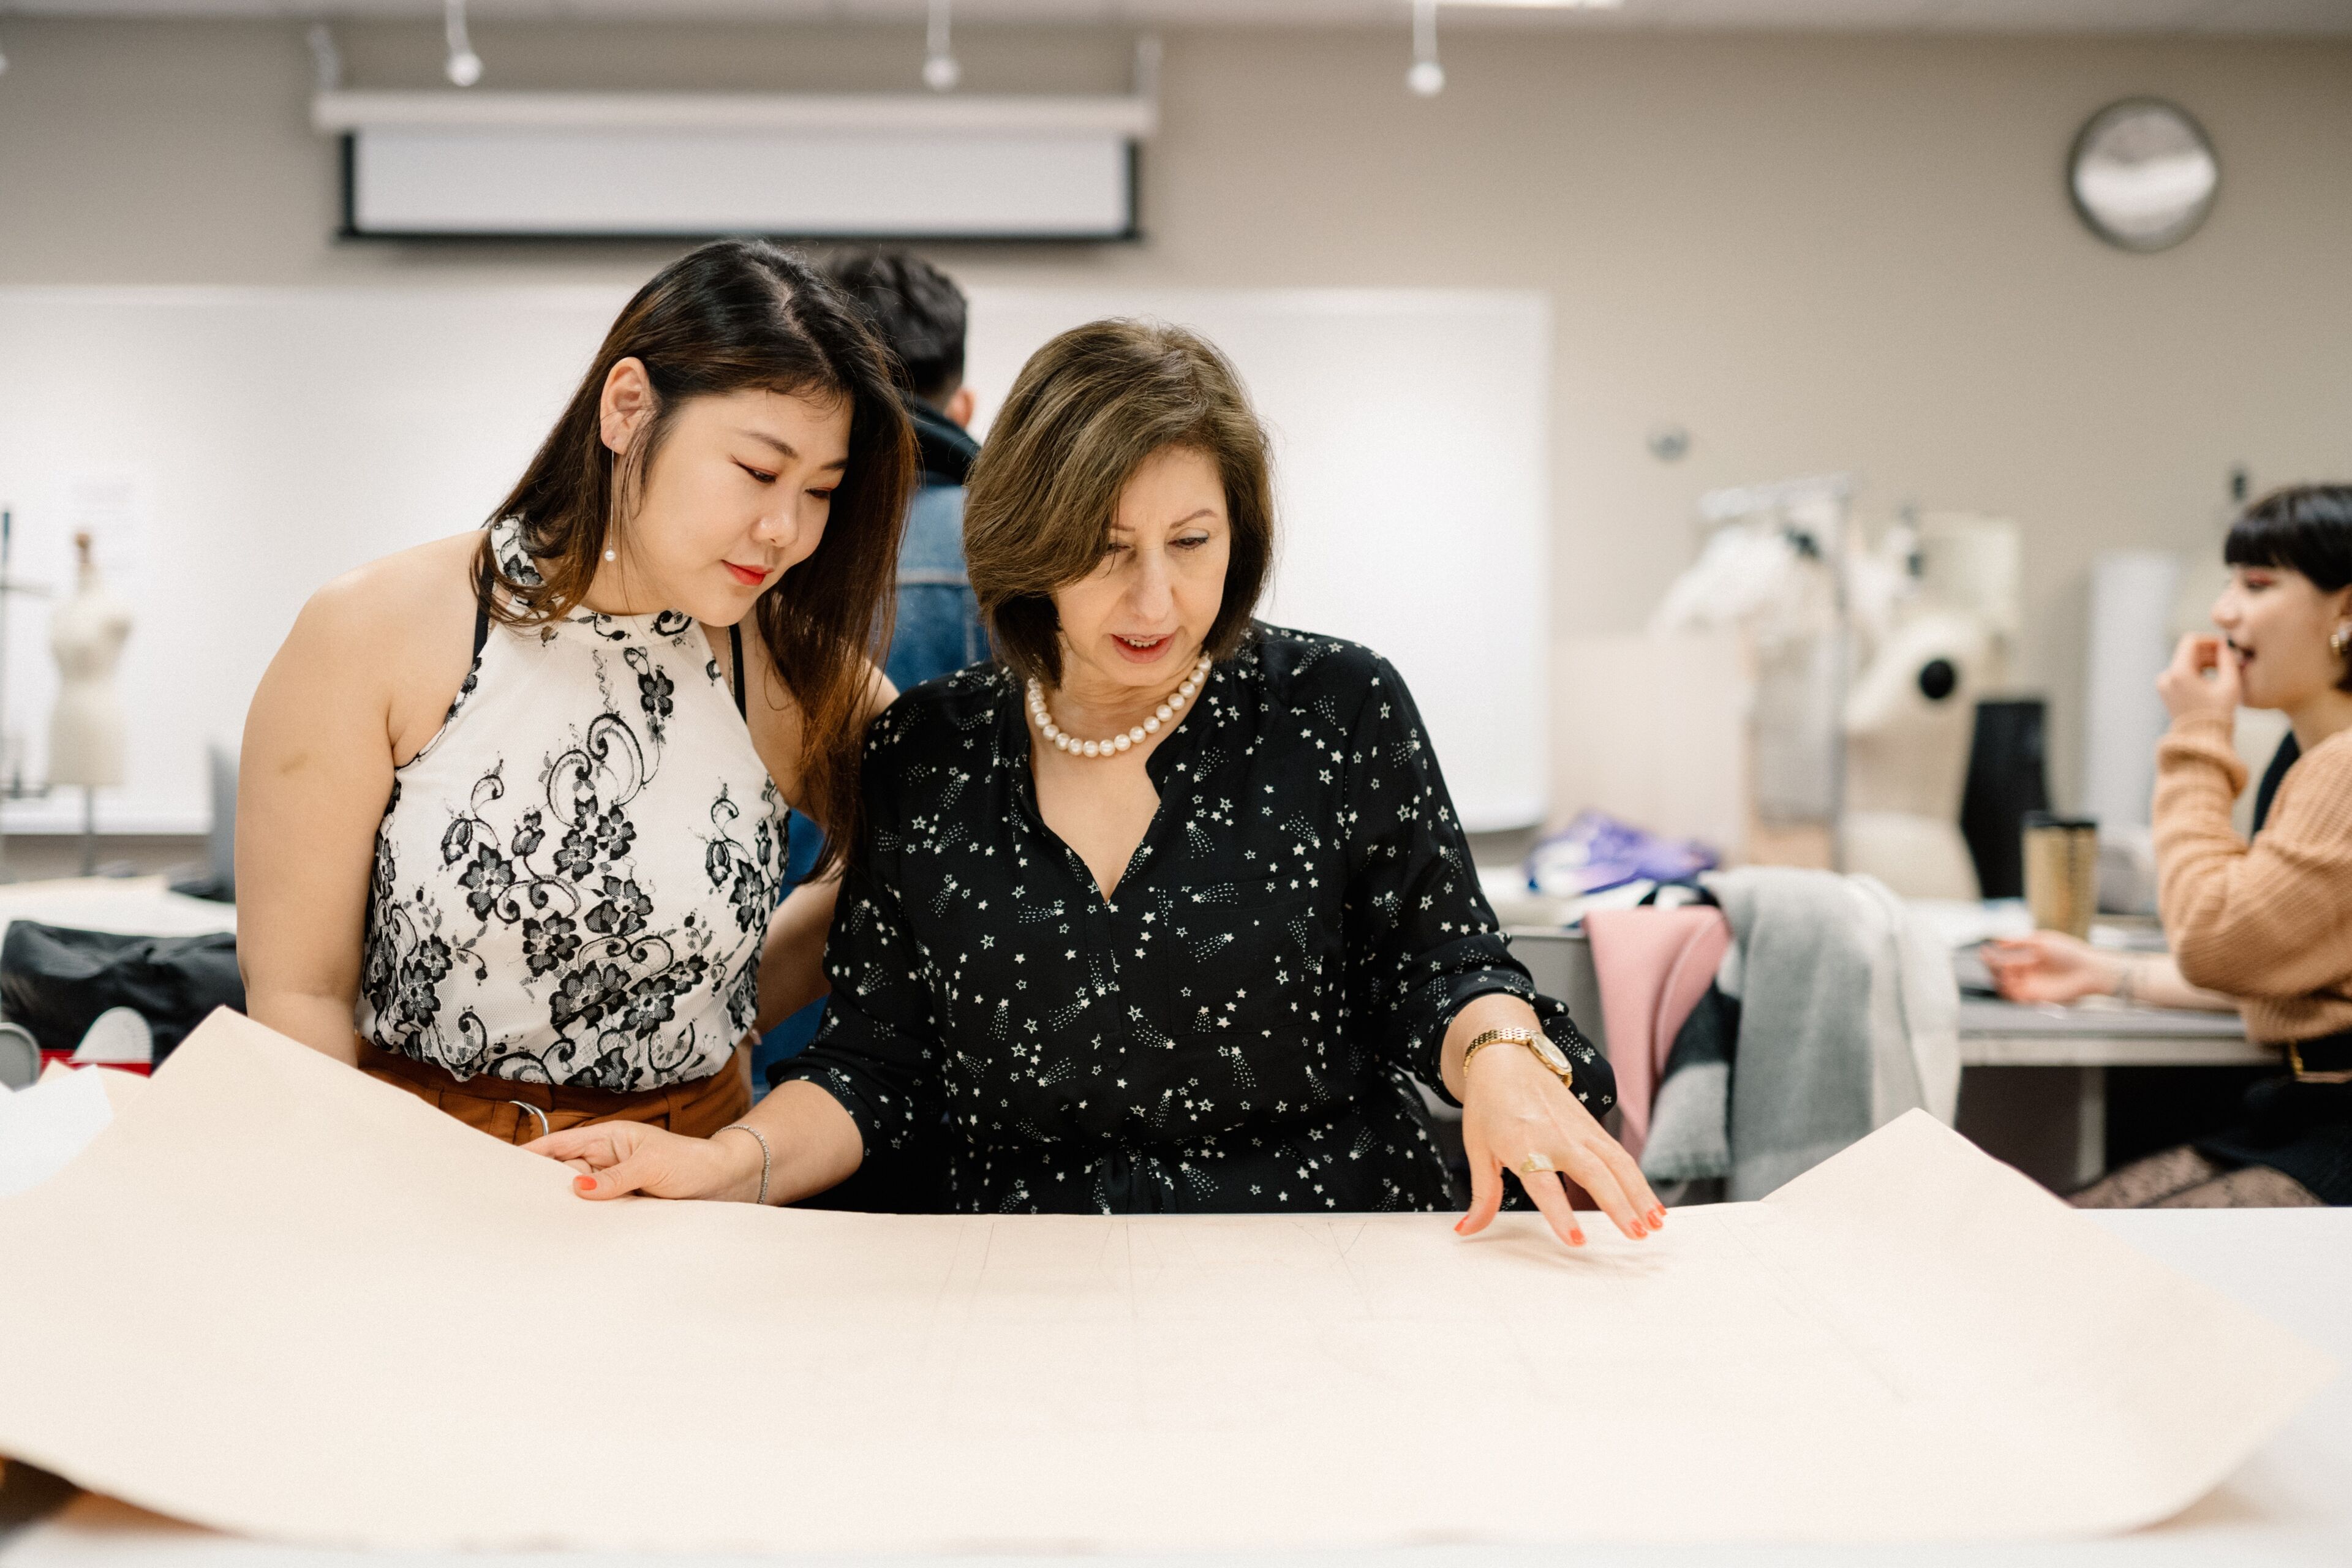 An experienced designer guides a young student through pattern making in a fashion studio.